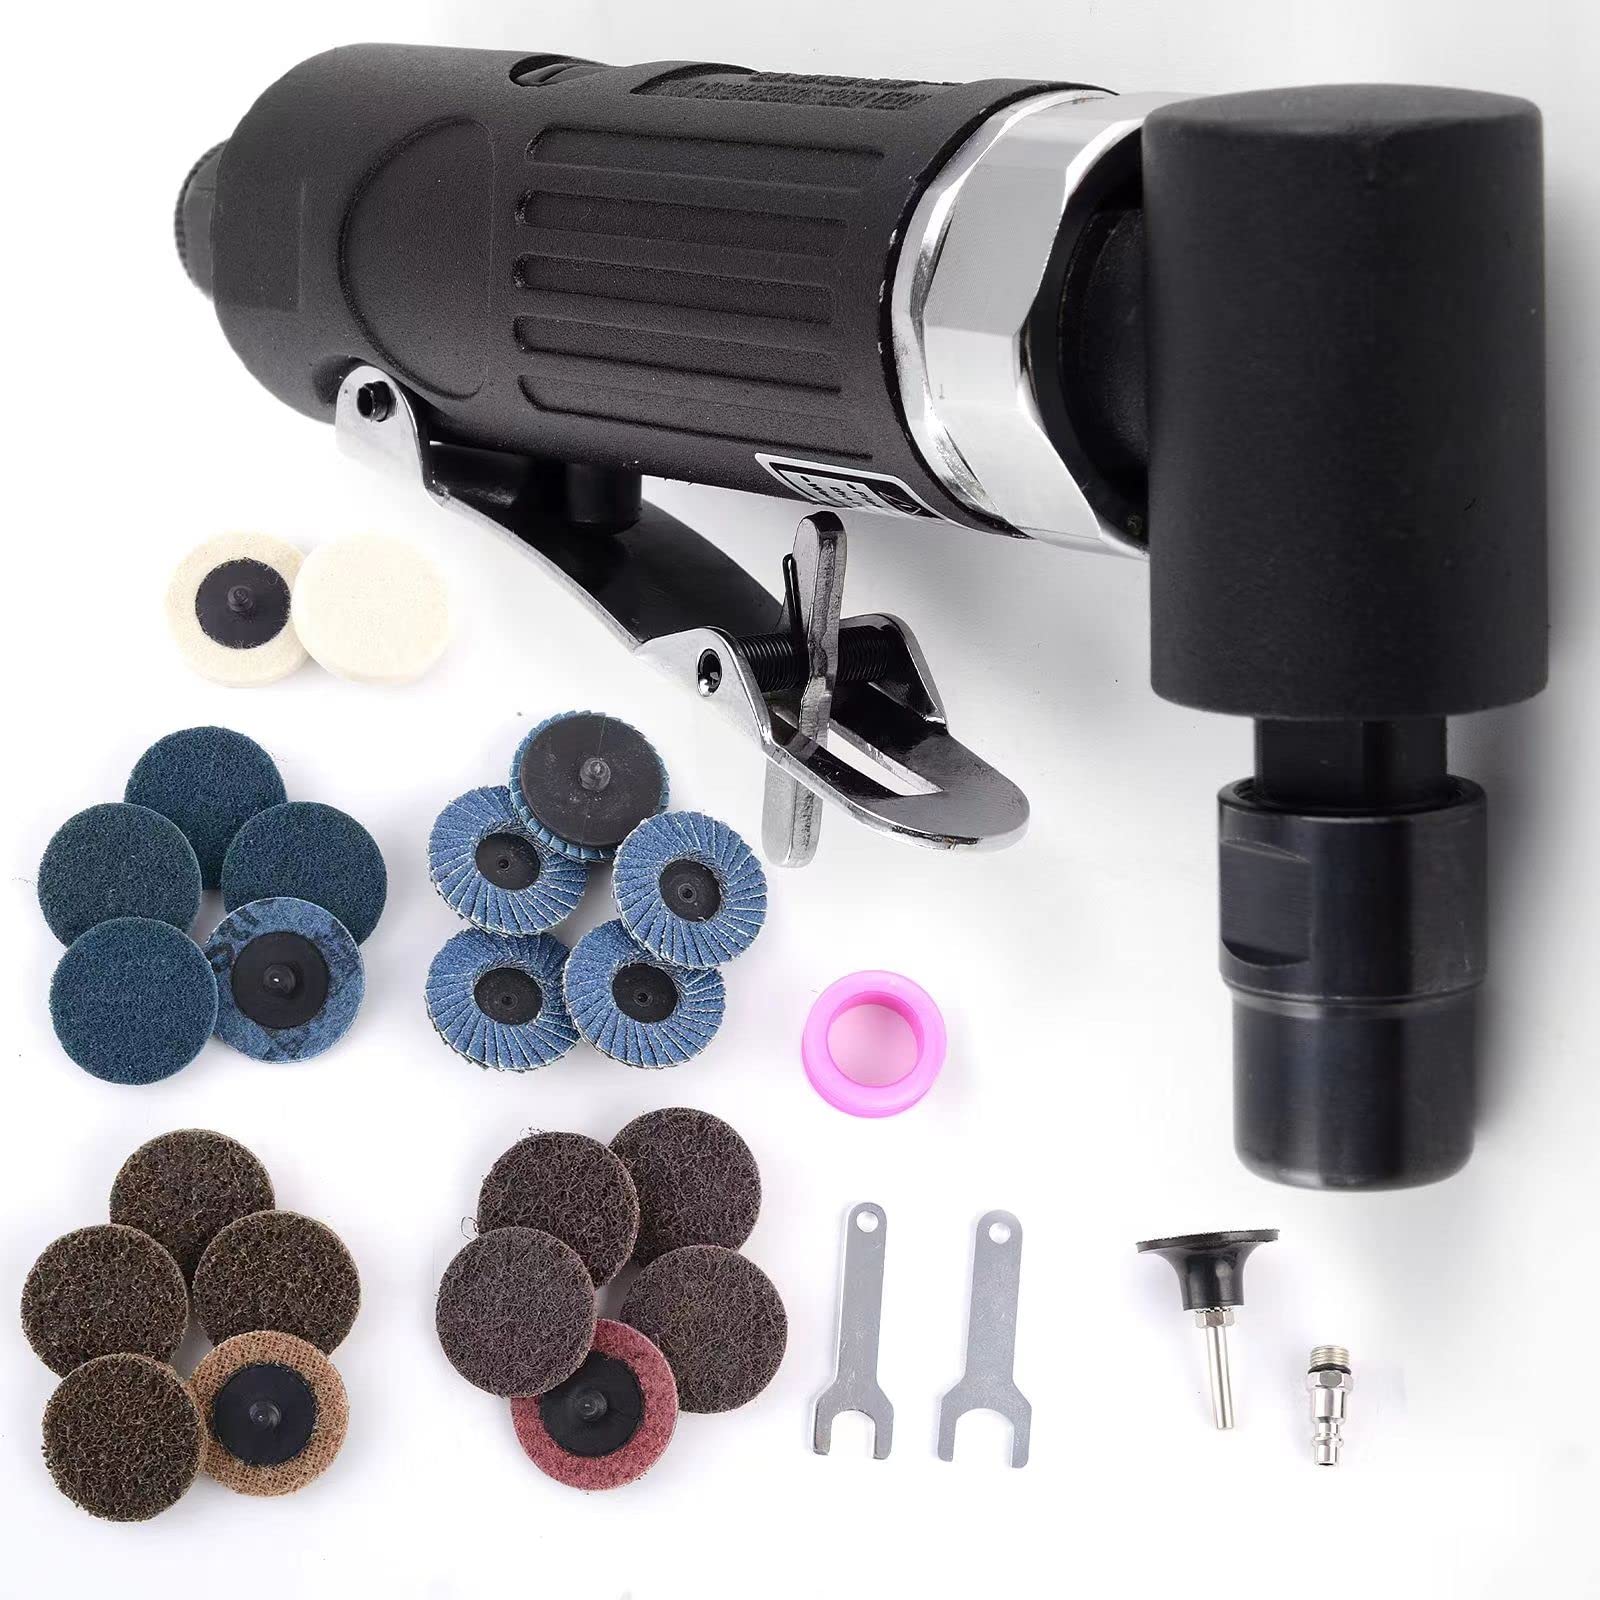 YON.SOU. Air Die Grinder - 1/4" with 22 pcs 2-inch roll lock sanding discs, Right Angle, 20,000 RPM, Pneumatic Power, 90 Degree,Small, air die grinder kit